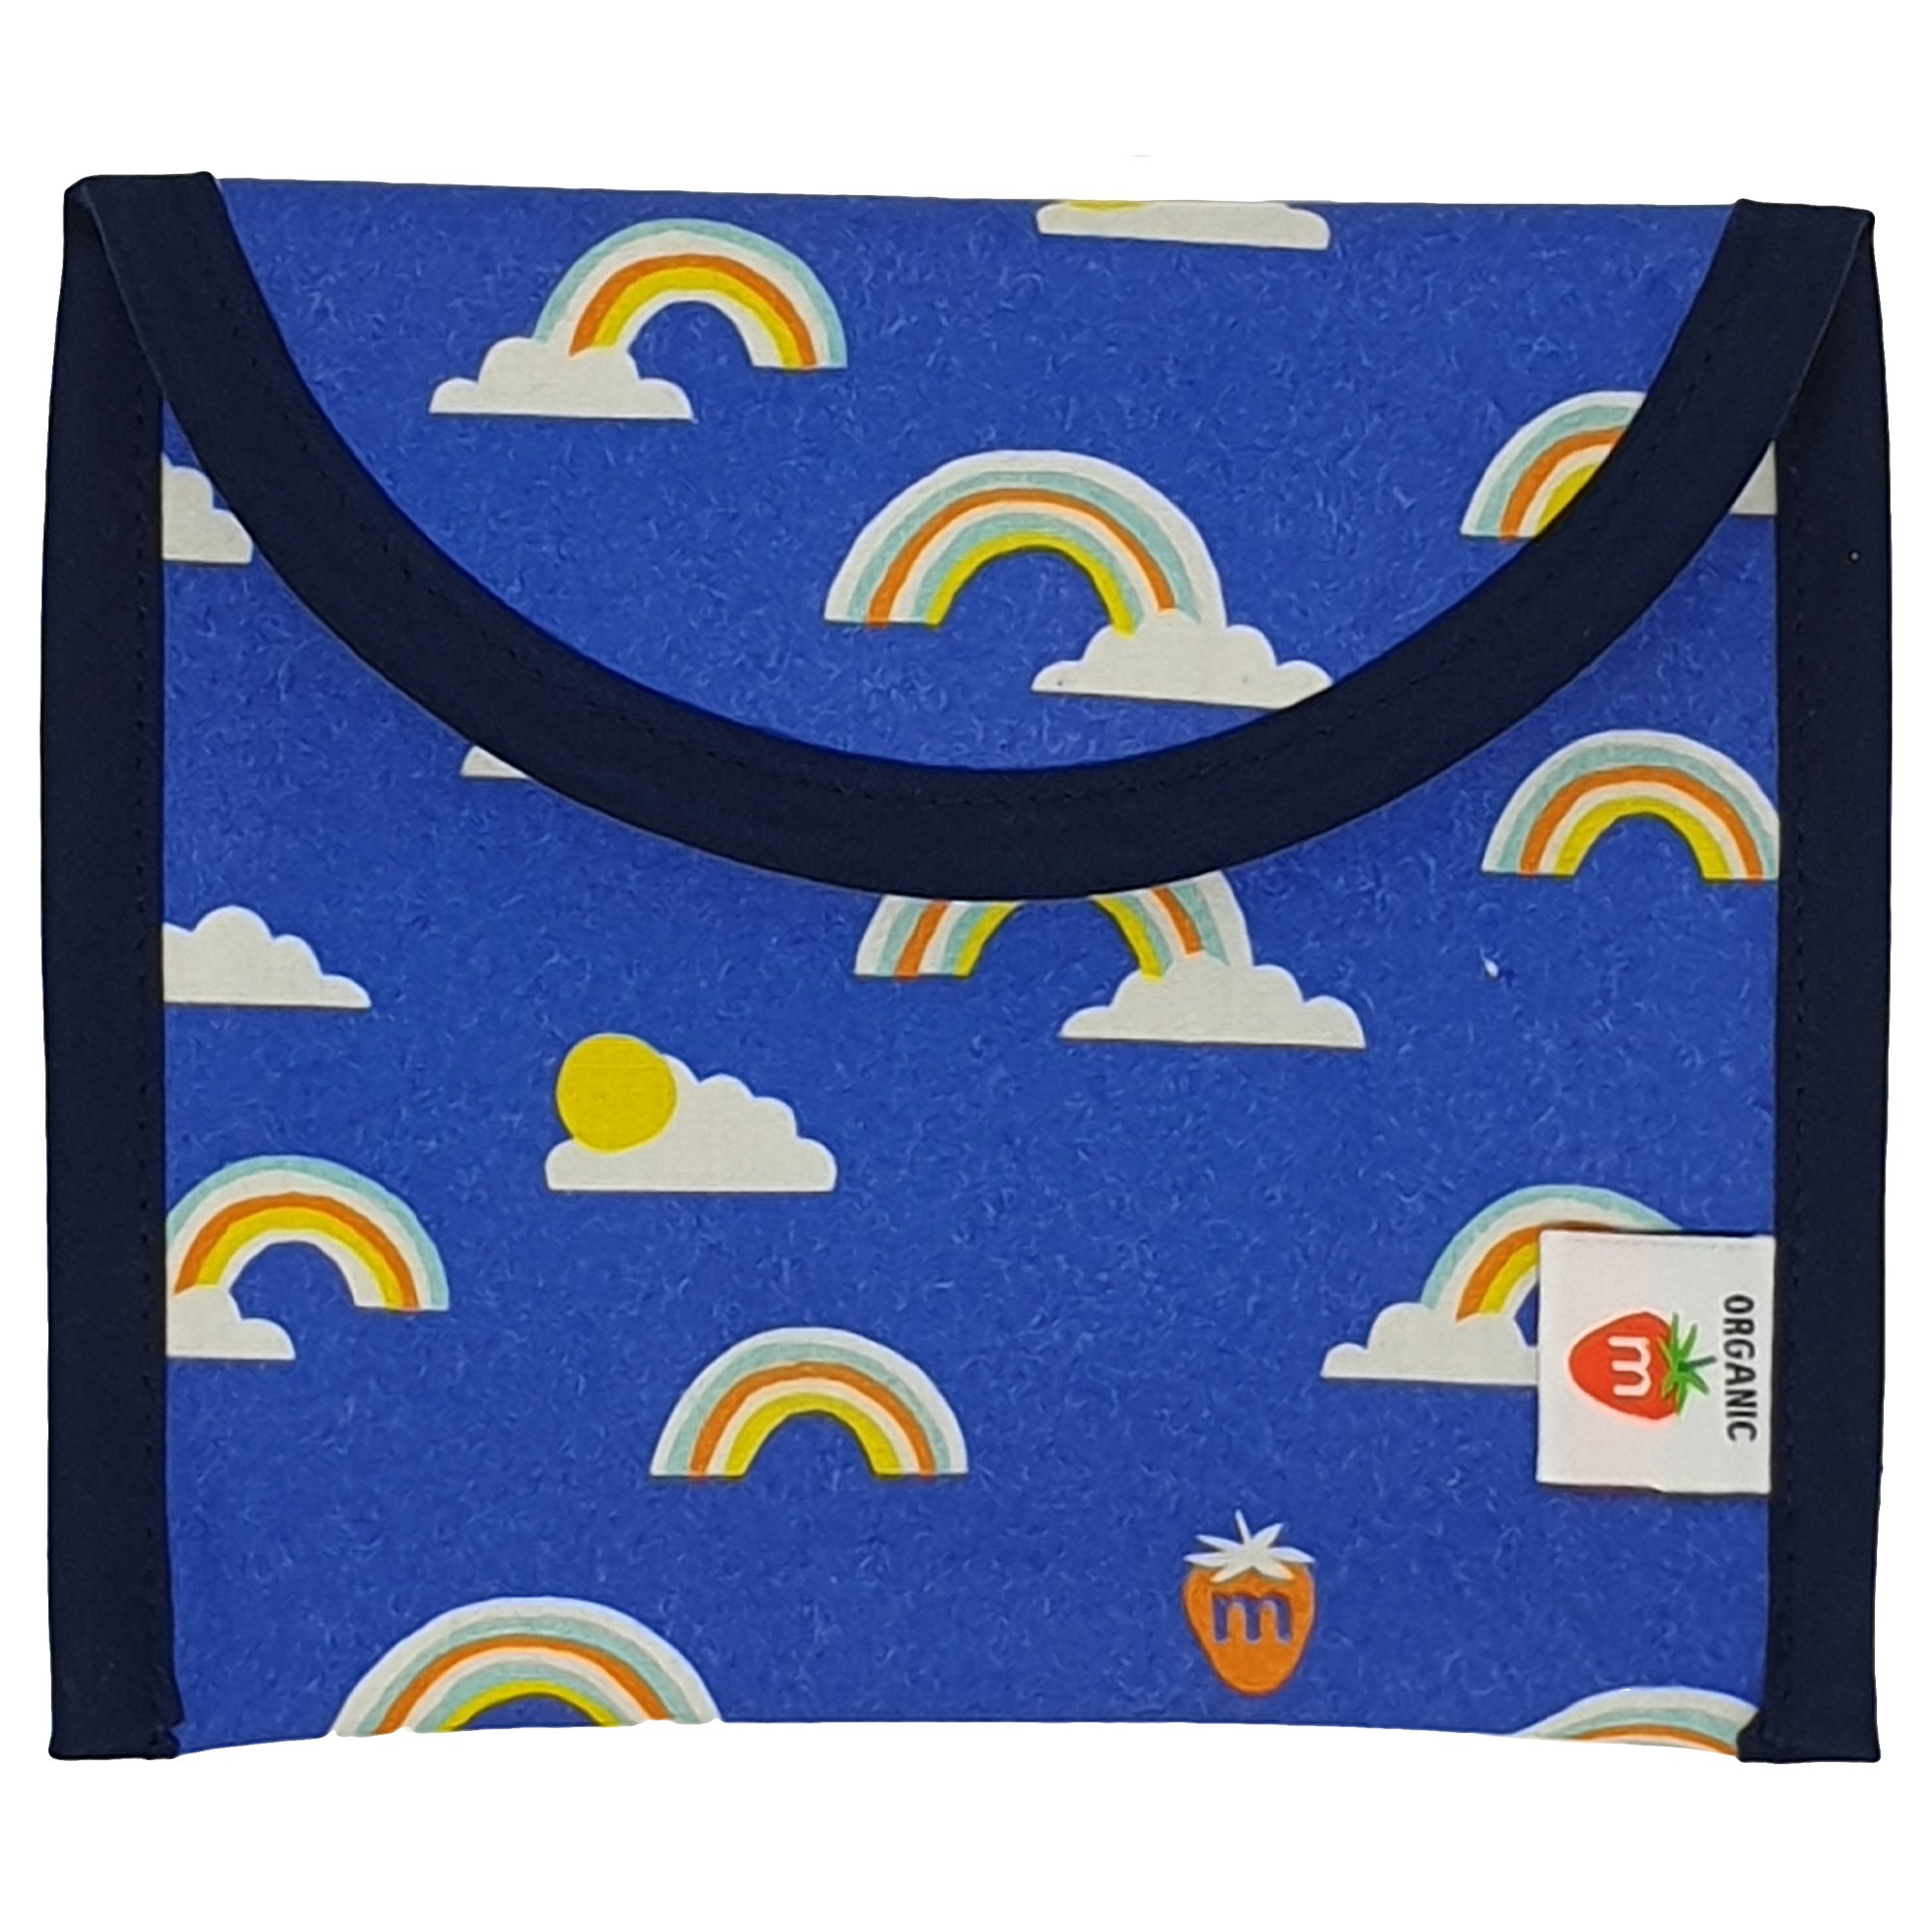 Munch Reusable Lunch Bag | Eco Friendly | Organic Material